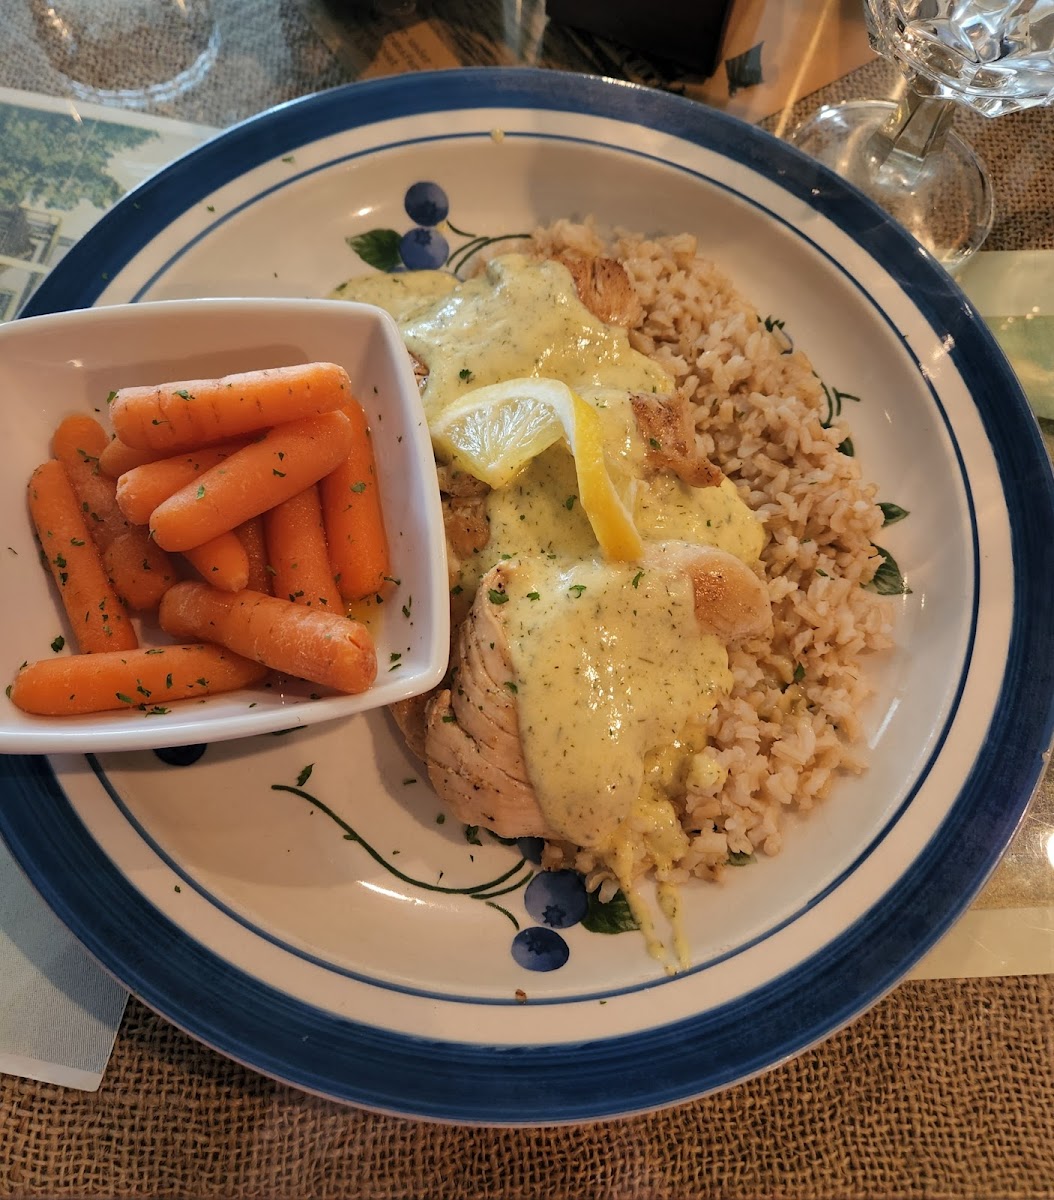 Lemon dill chicken with brown rice